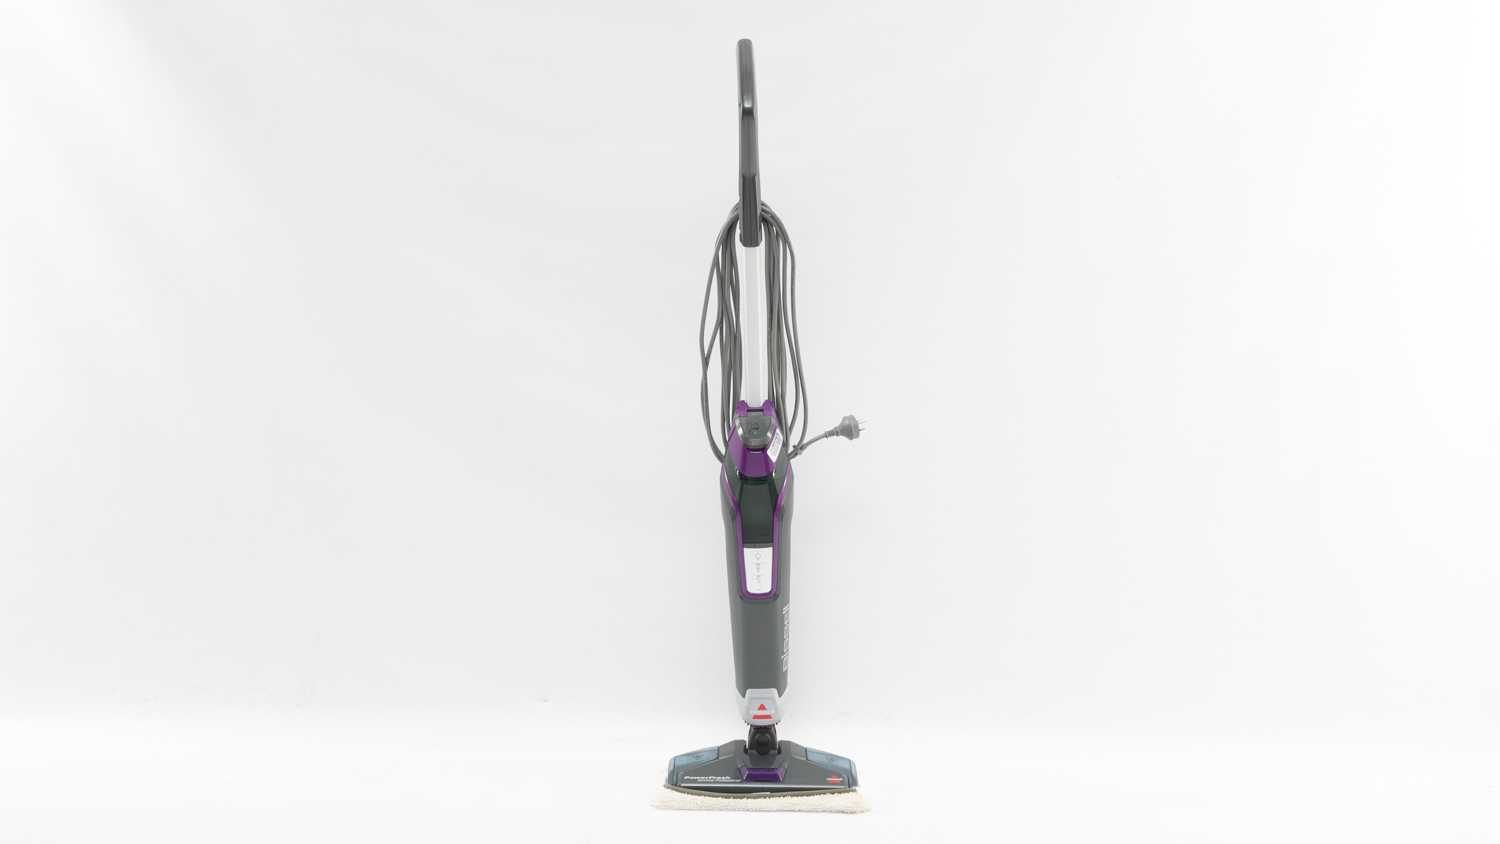 Bissell 1979H Professional Powerfresh Sanitize Steam Mop carousel image